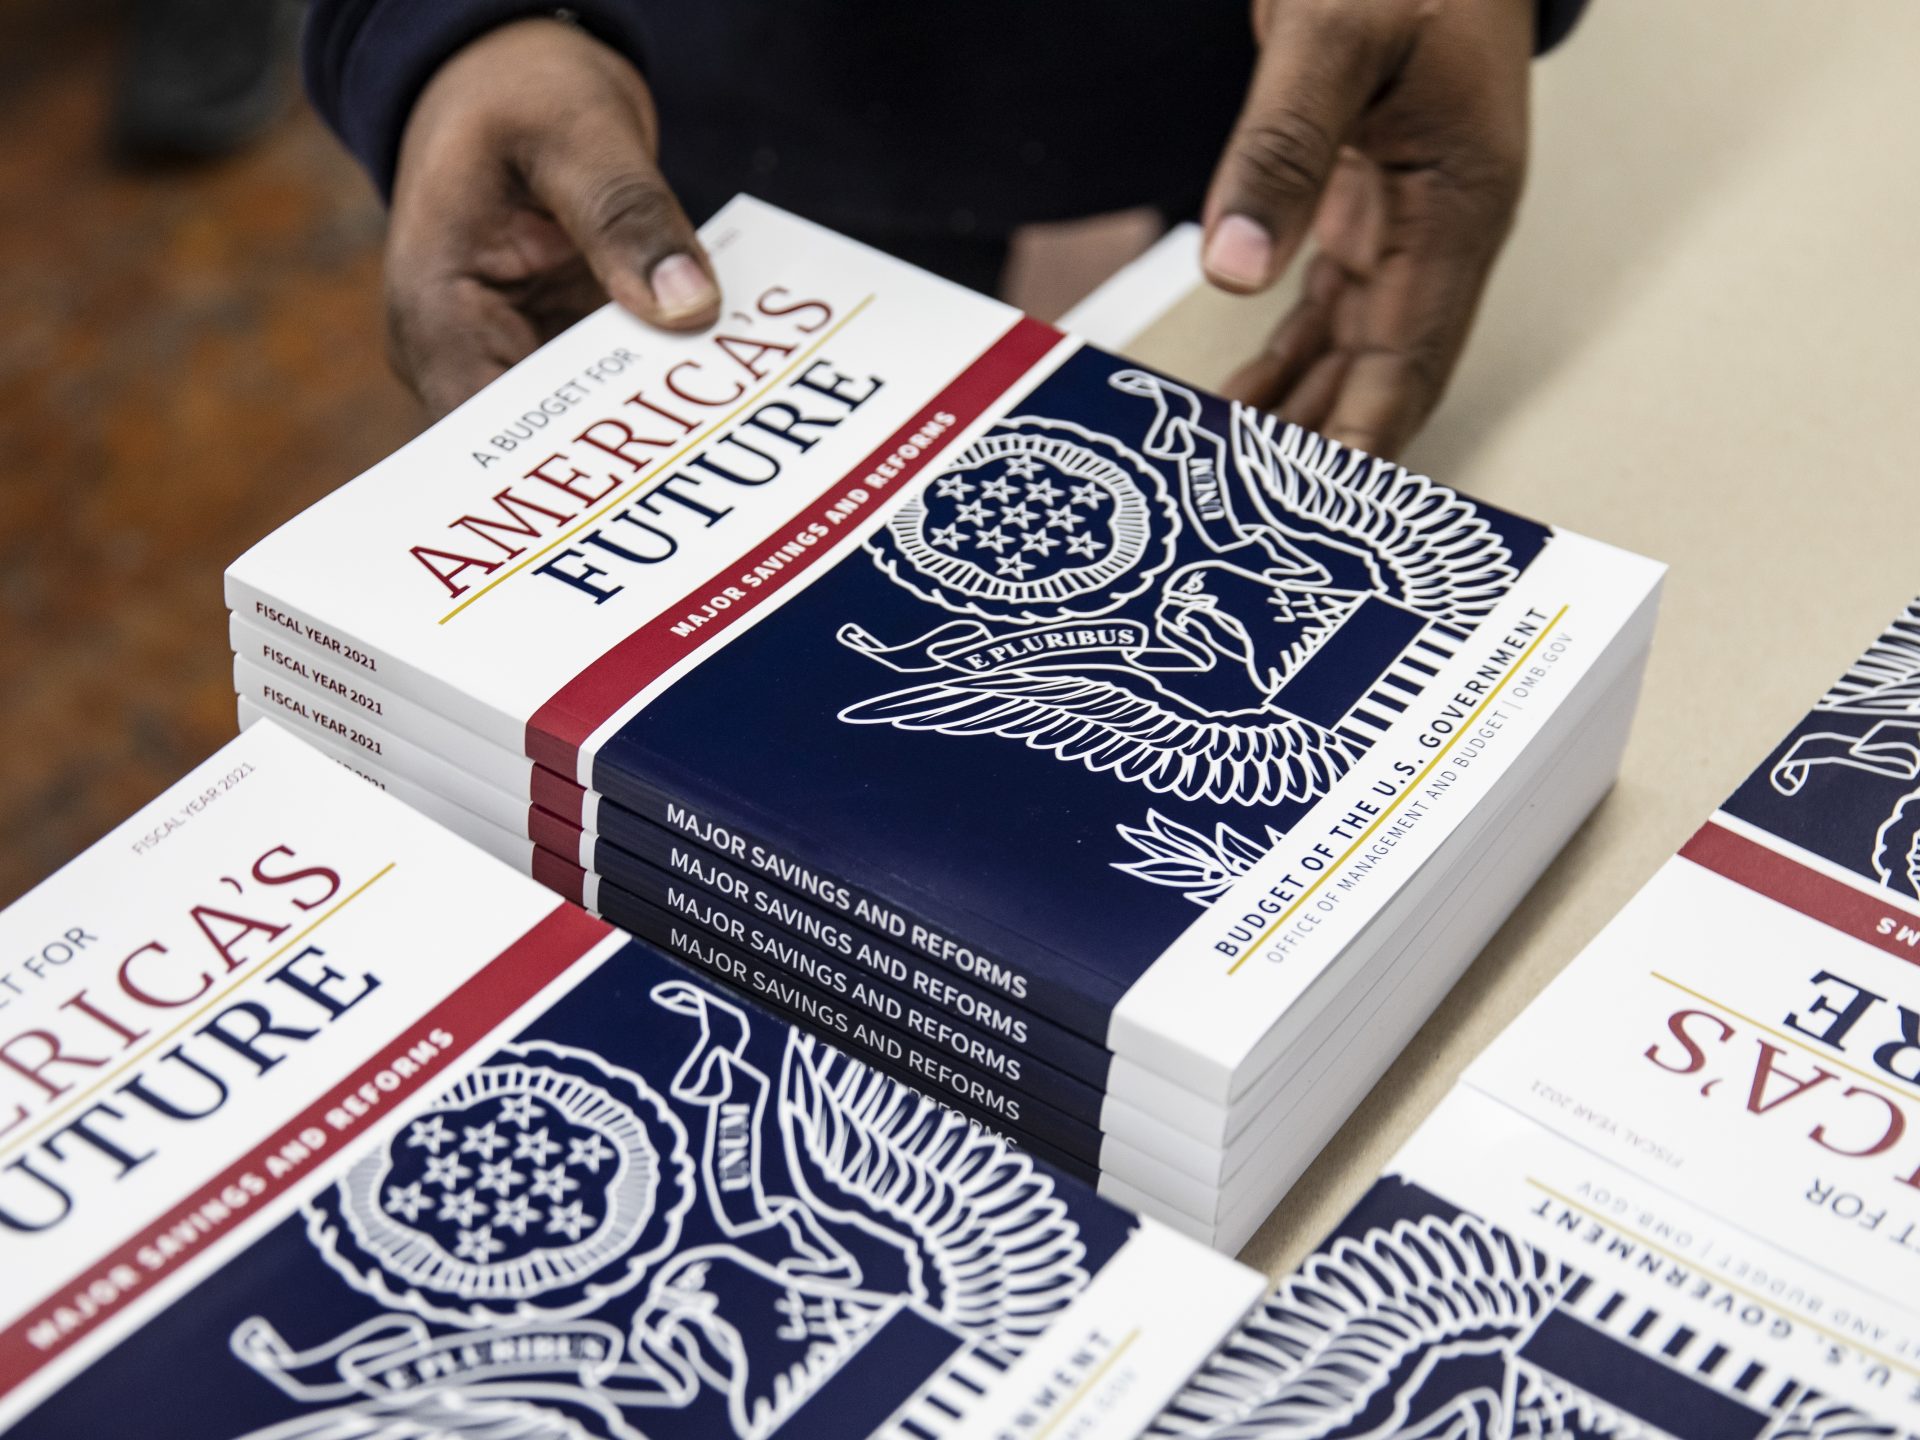 Hot off the presses: The president's budget proposal for fiscal 2021 at the Government Publishing Office. The election year proposals are unlikely to gain traction in the Democratic-controlled House of Representatives.